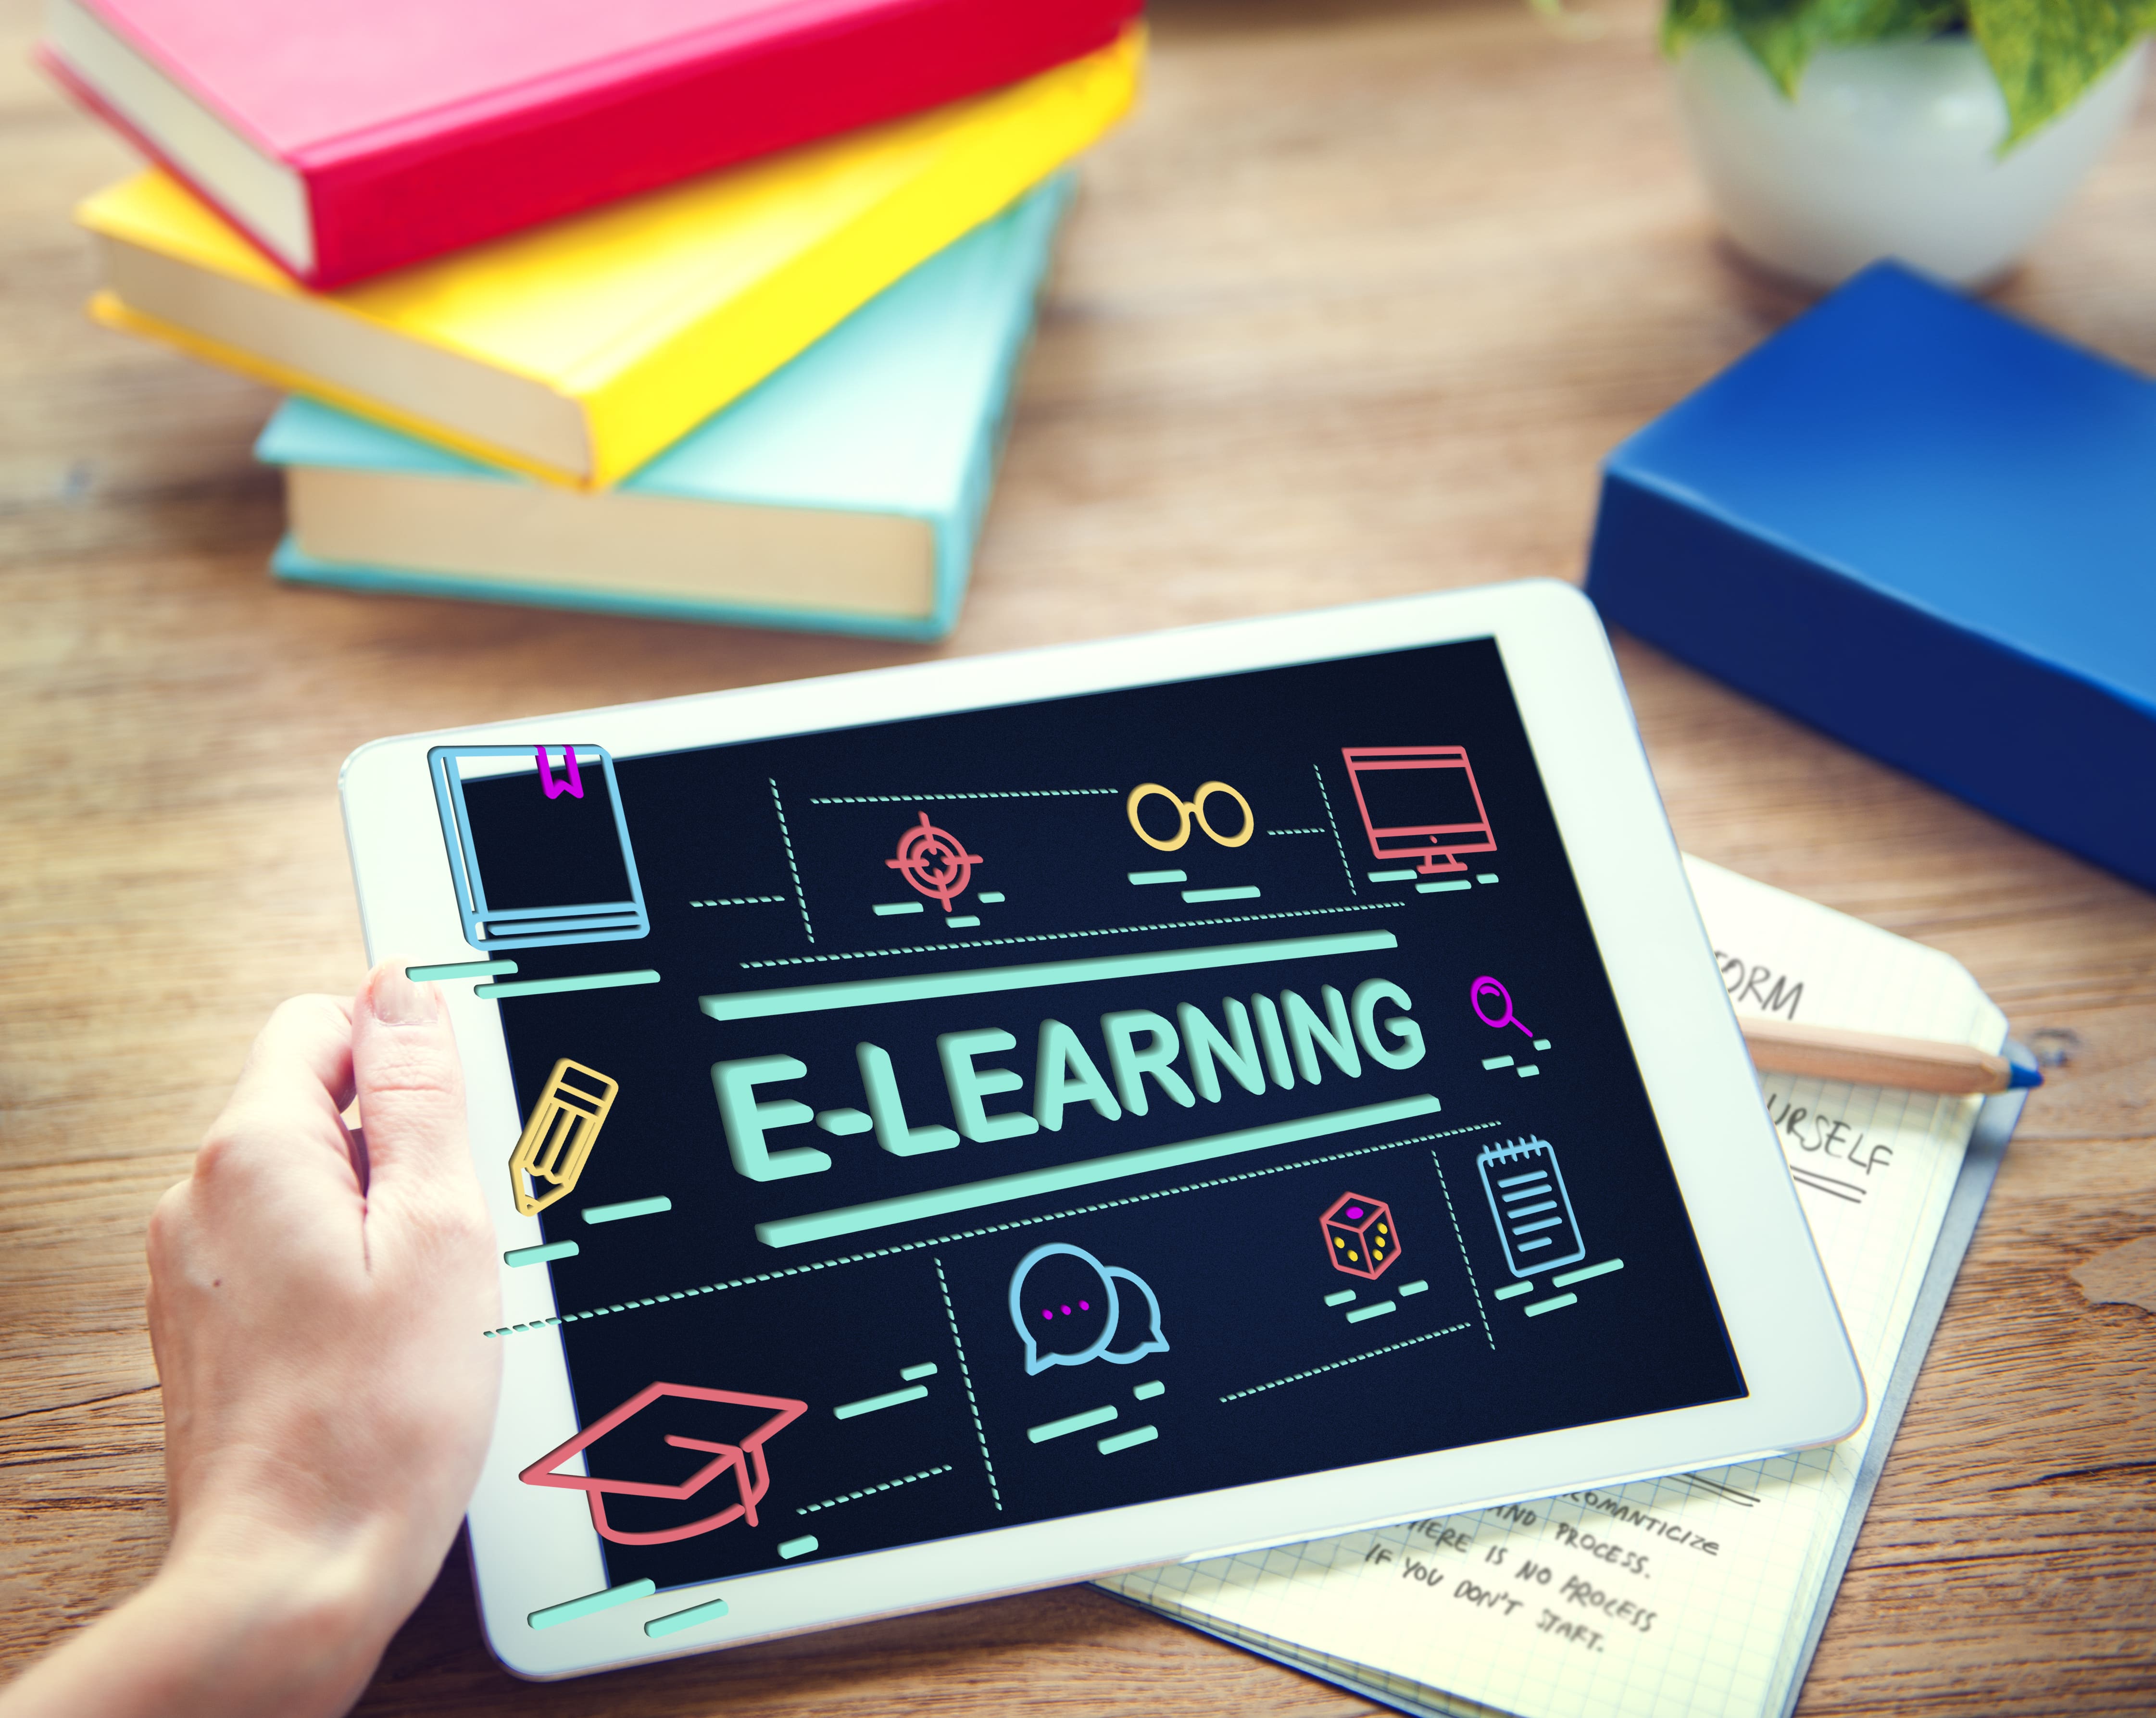 5 Tips to Make Your E-learning Relevant